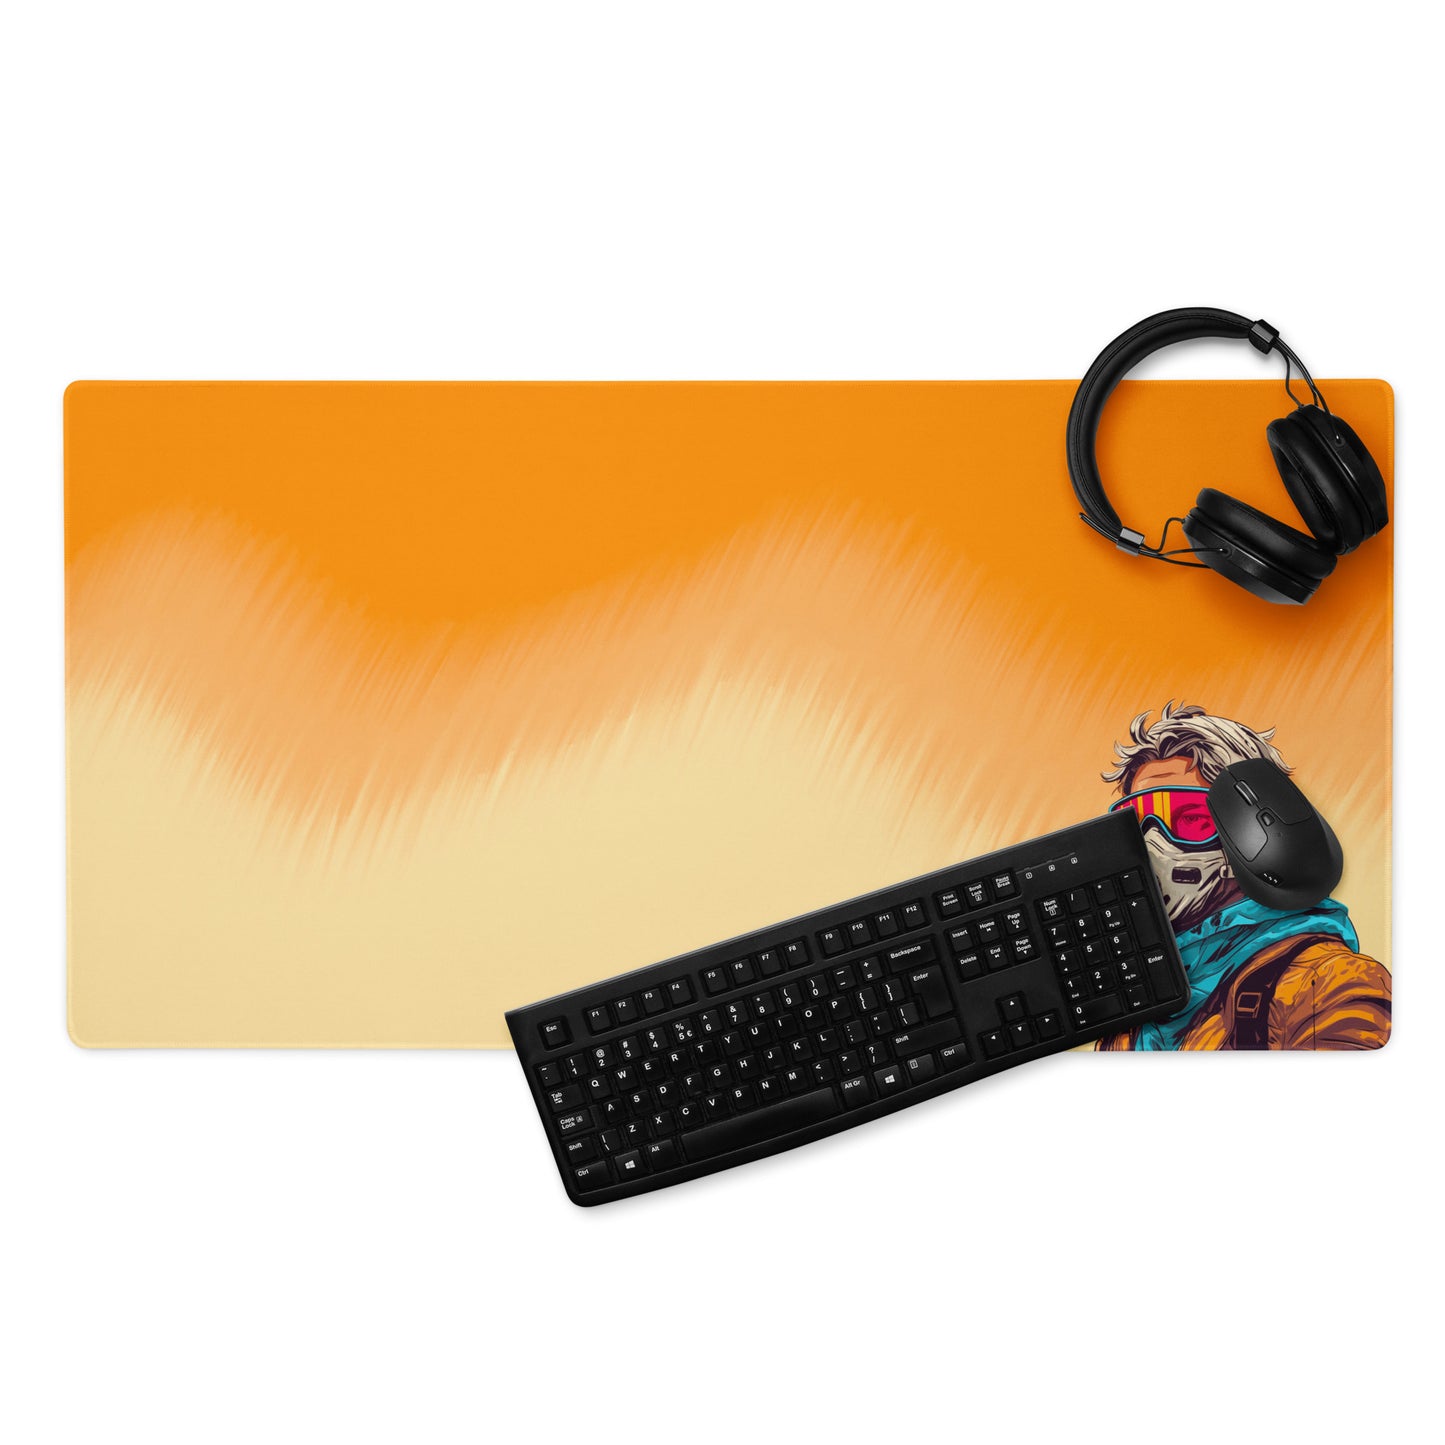 A 36" x 18" desk pad with a man standing in a sandstorm. With a keyboard, mouse, and headphones sitting on it.